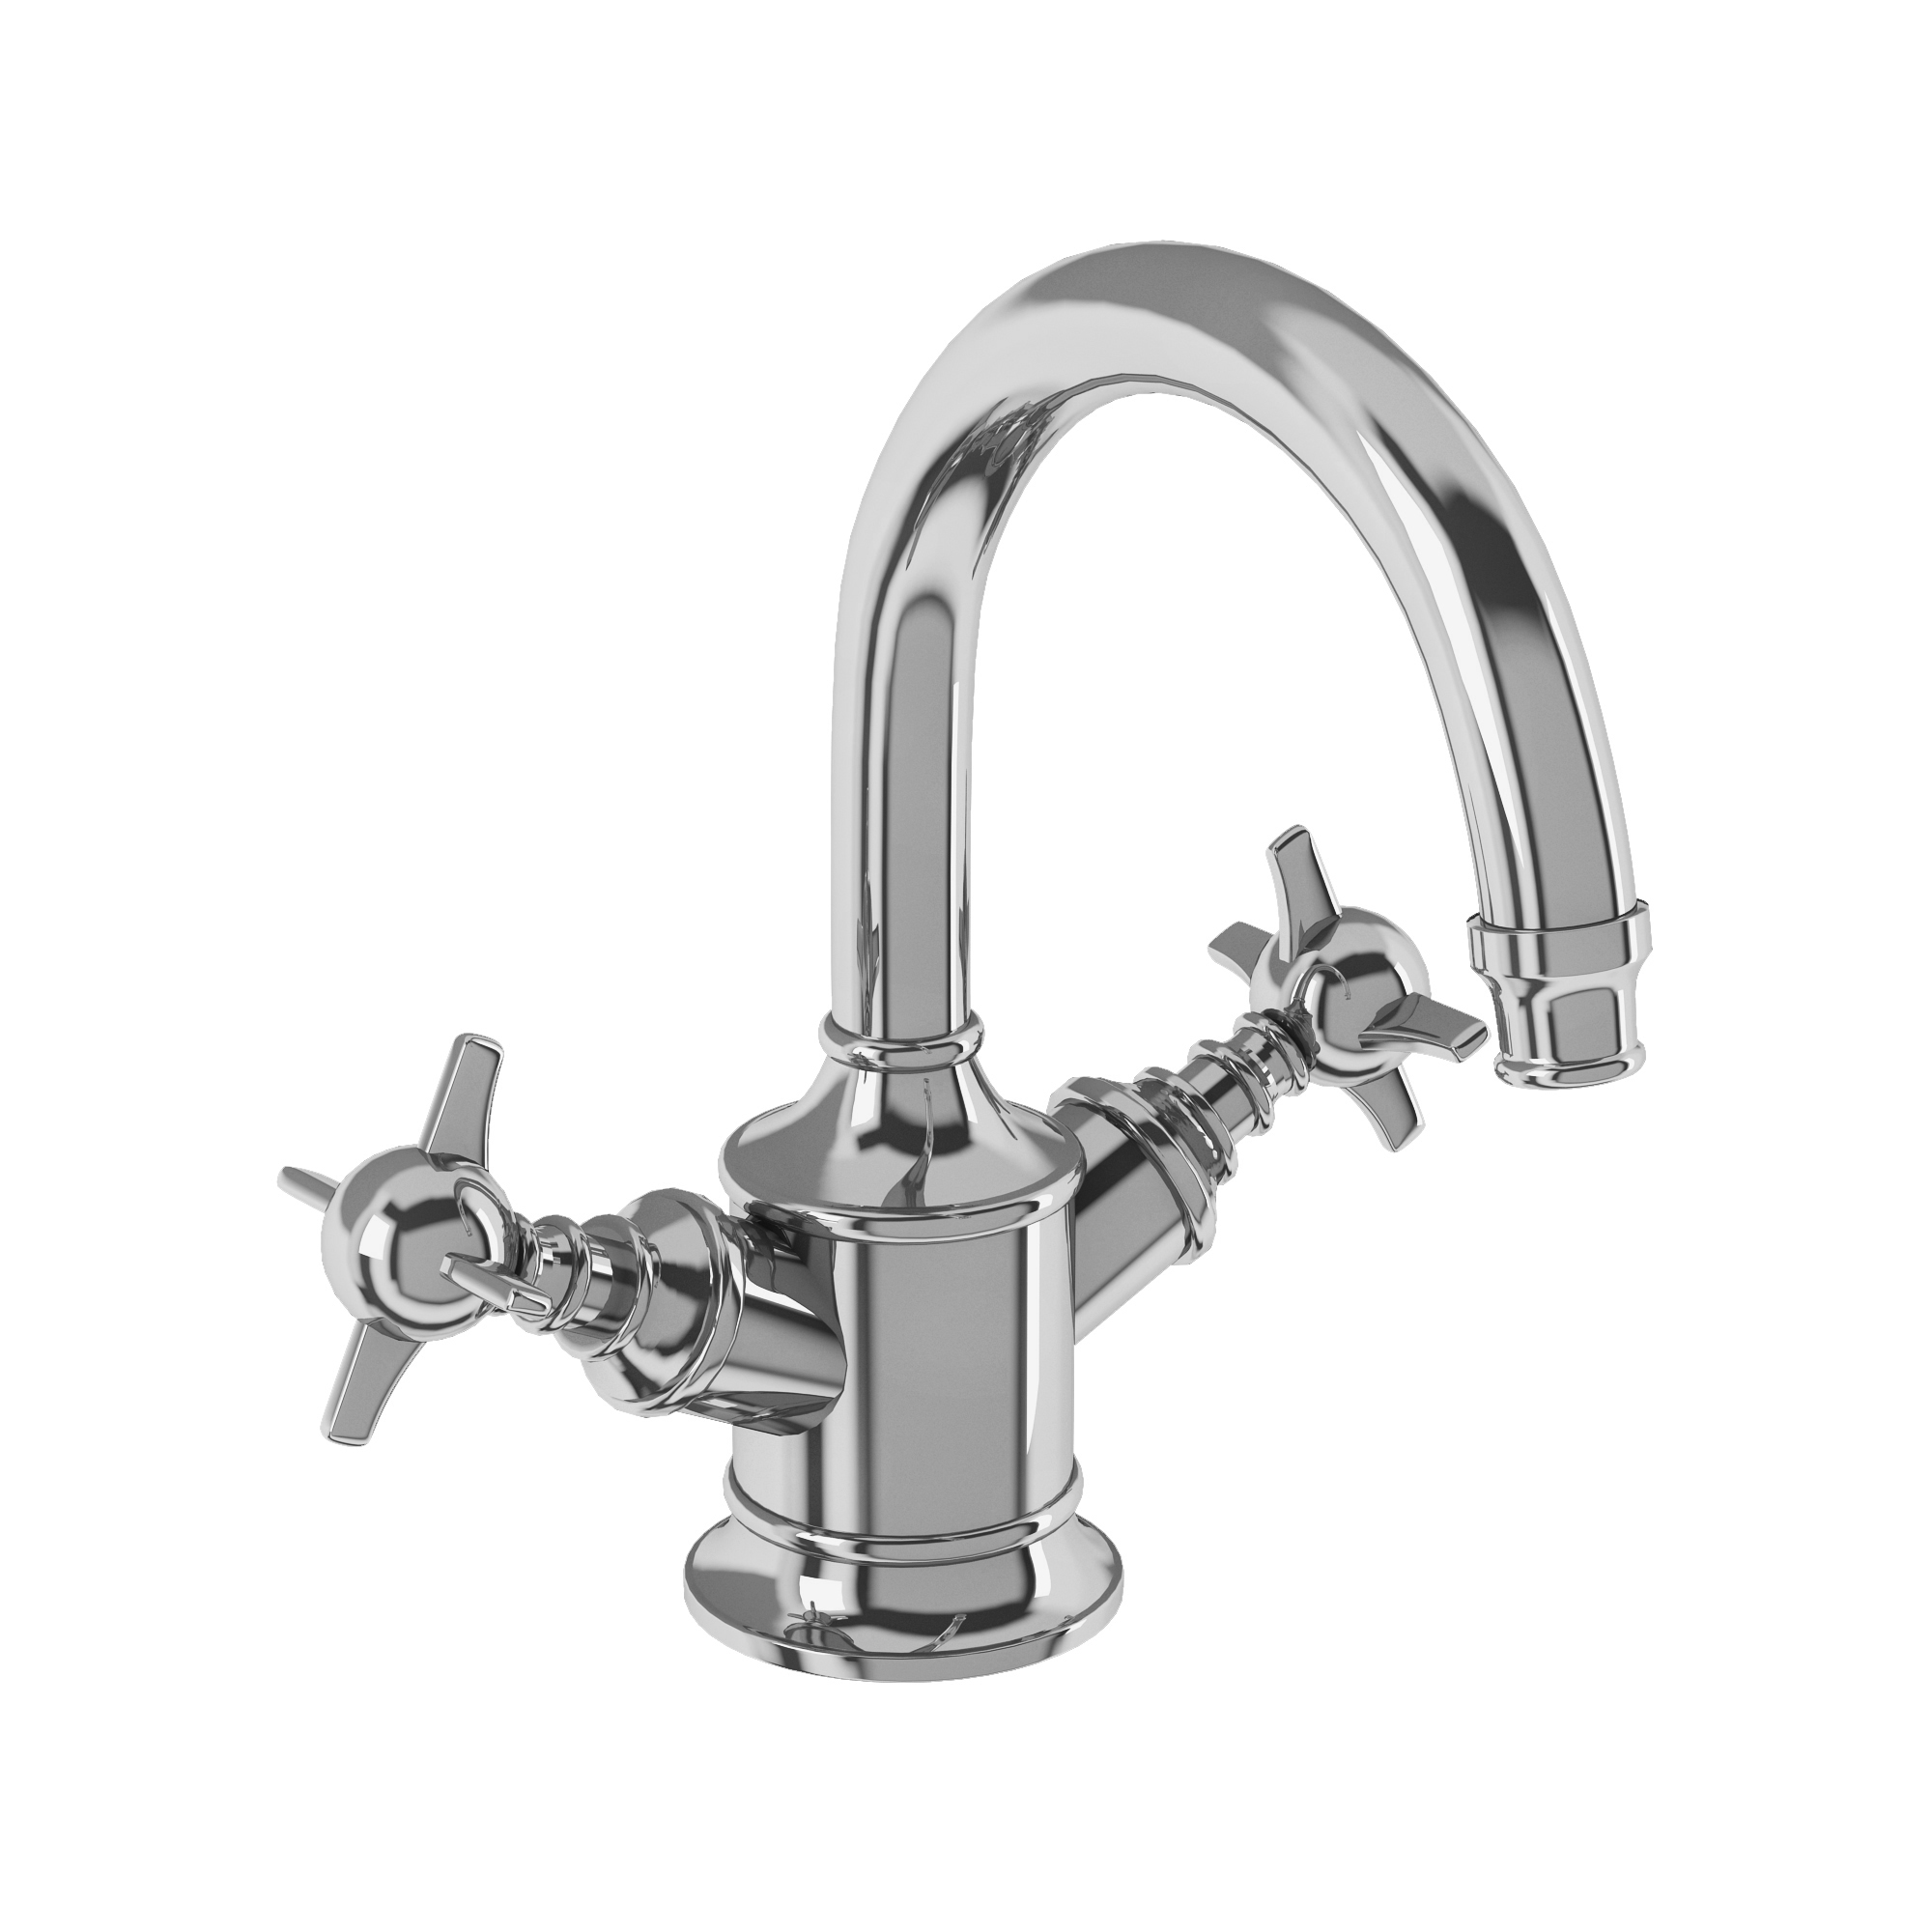 Arcade Dual-lever basin mixer without pop up waste - chrome - with tap handle